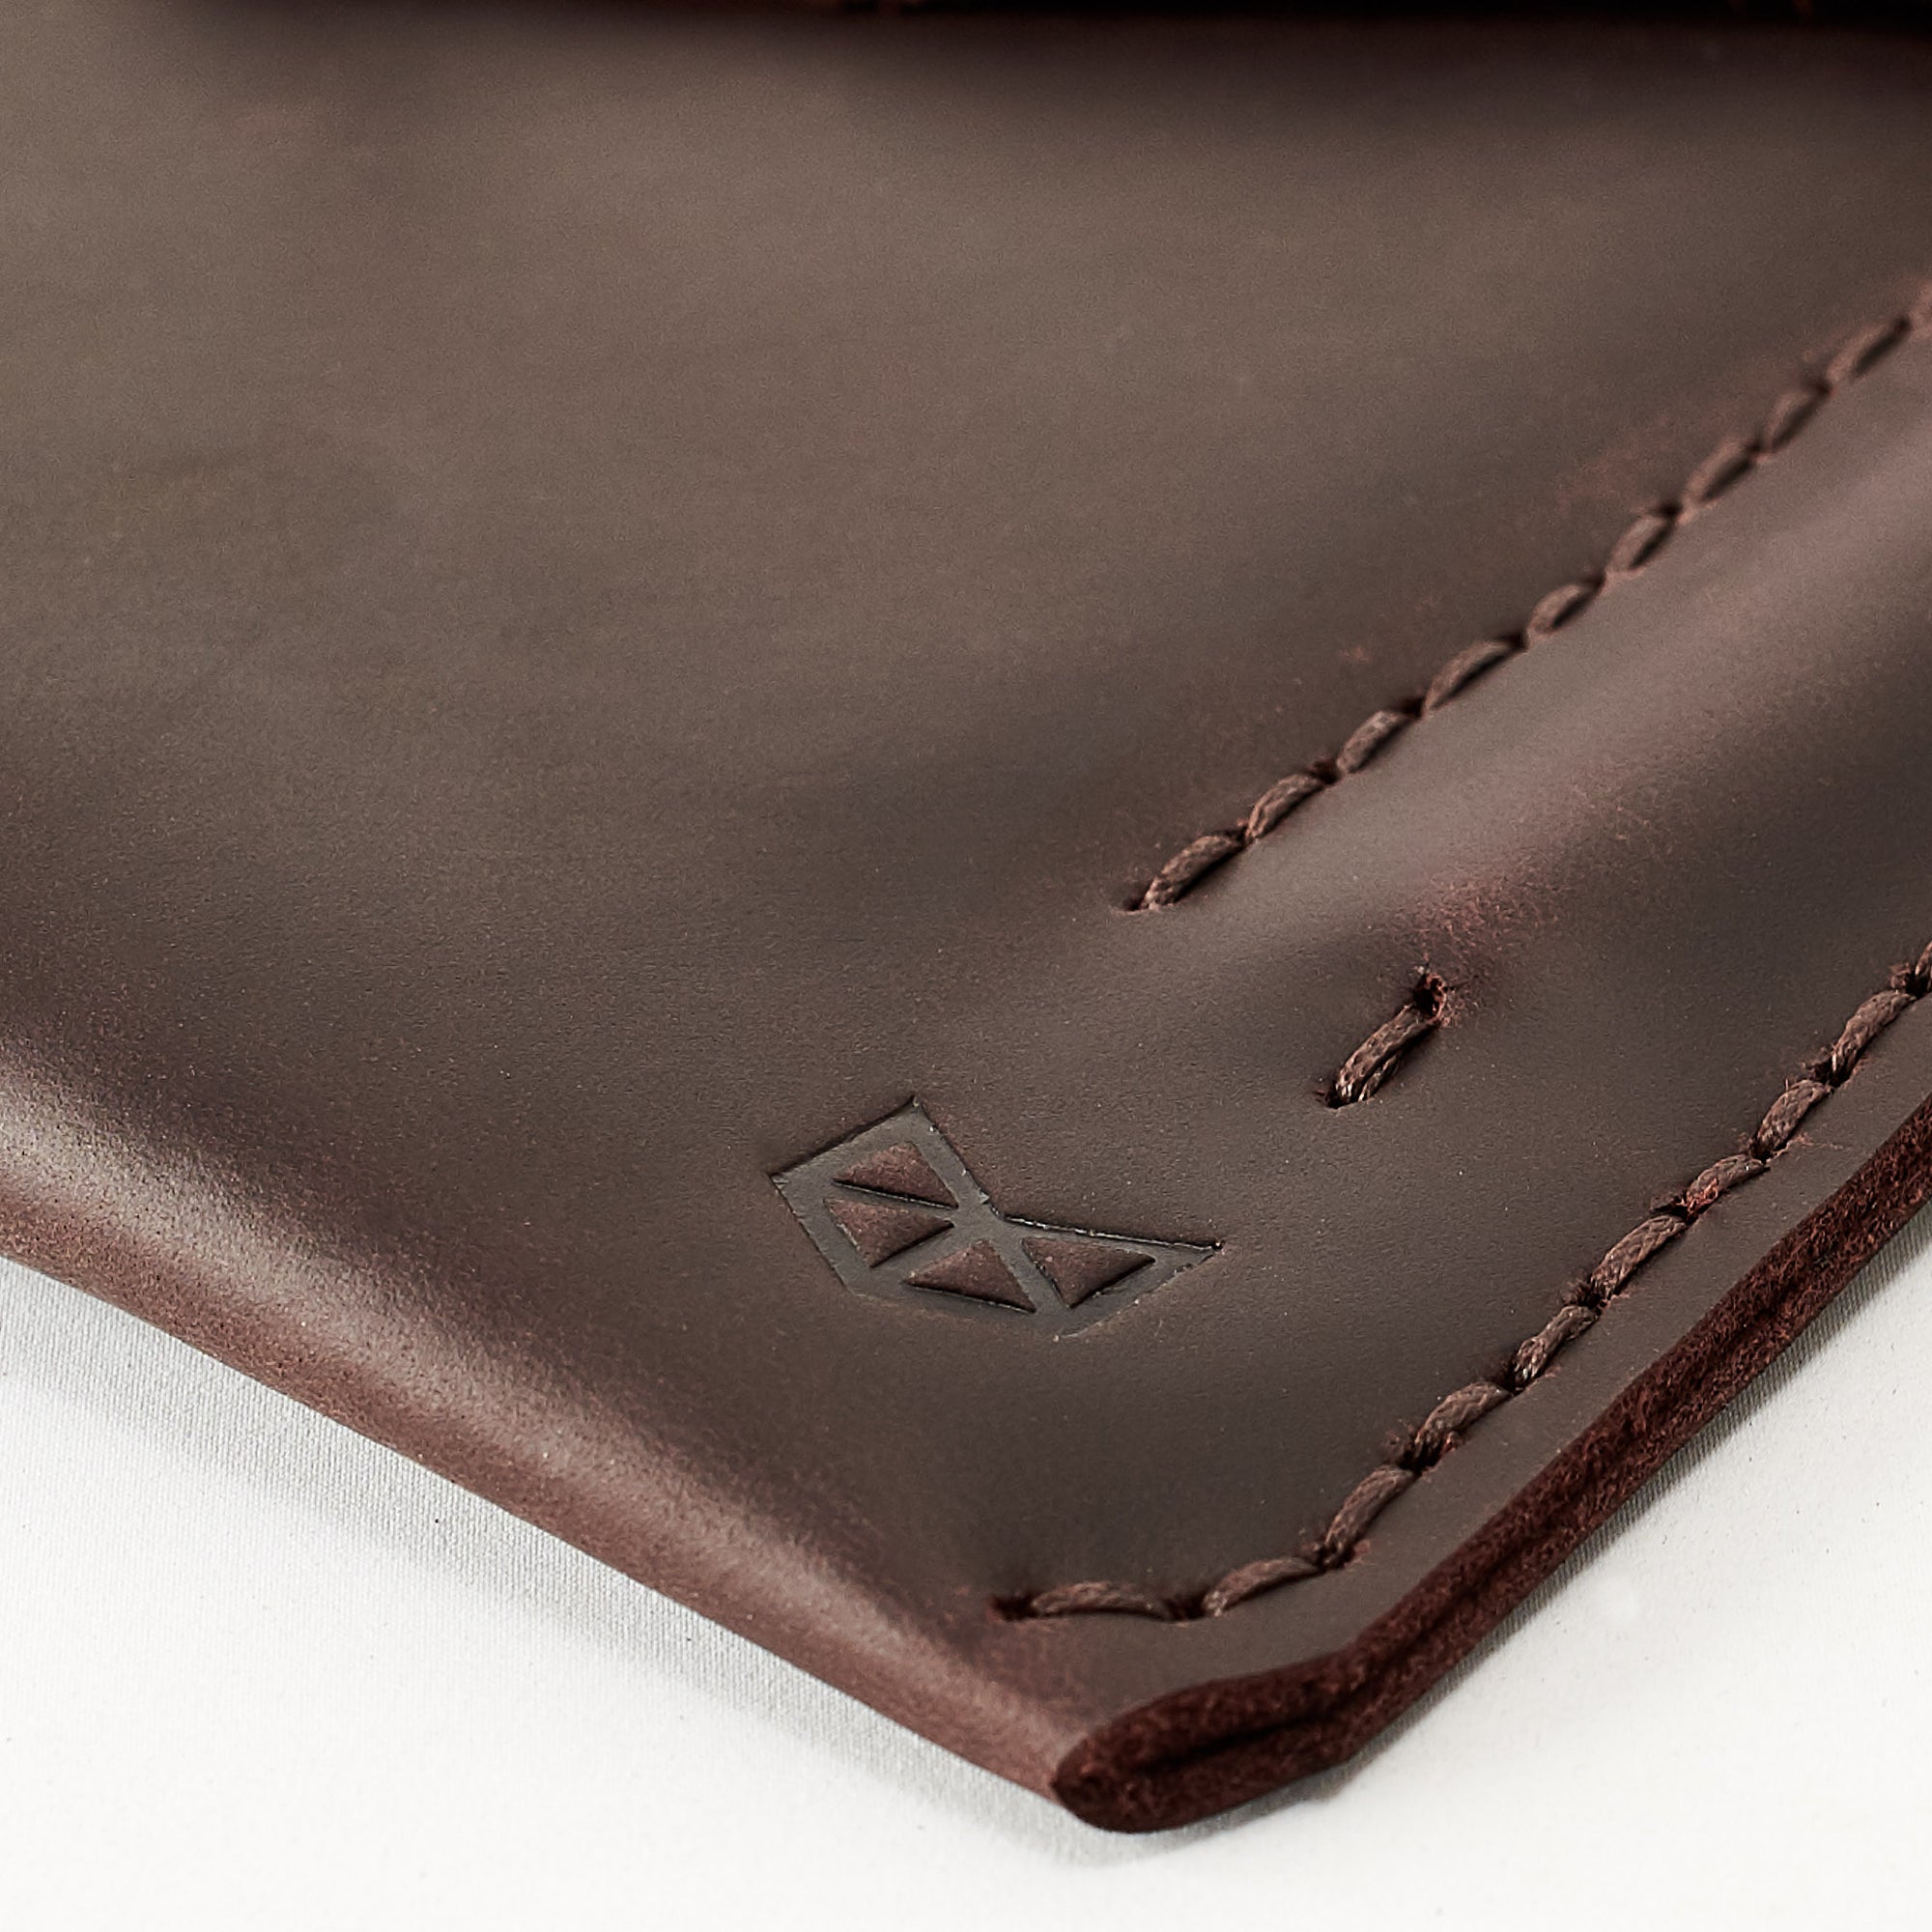 Hand stitched case. Dark brown leather sleeve for ASUS Zenbook Pro Duo. Mens gifts